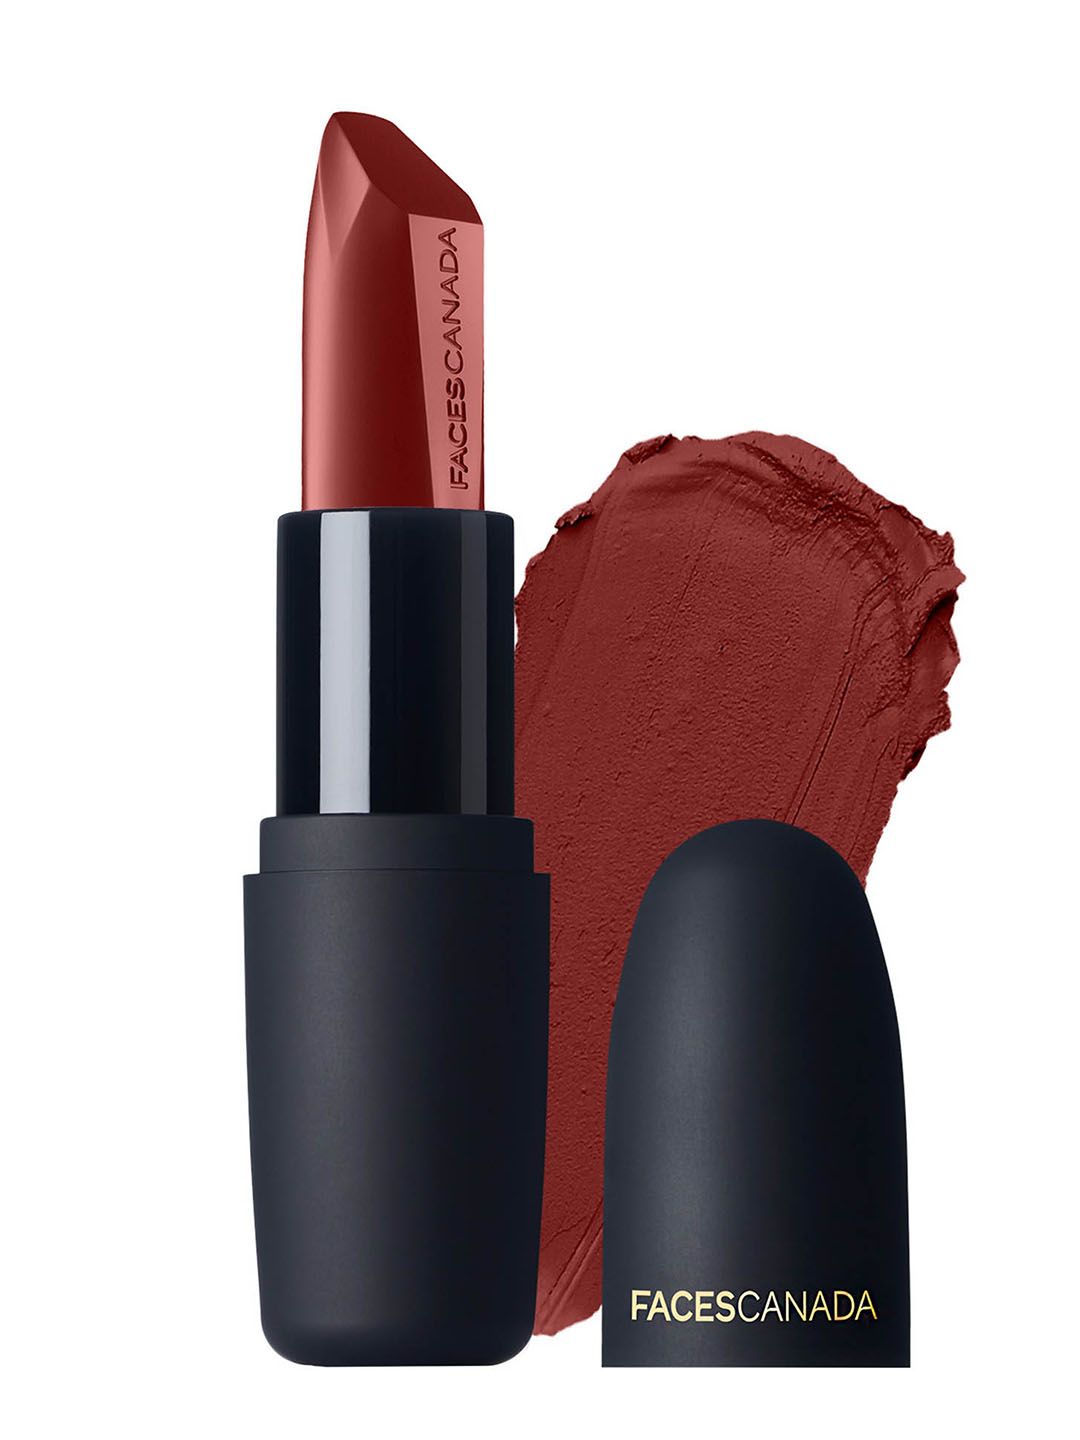 FACES CANADA Weightless Matte Finish Lipstick Maroon Love 06 4gm Price in India